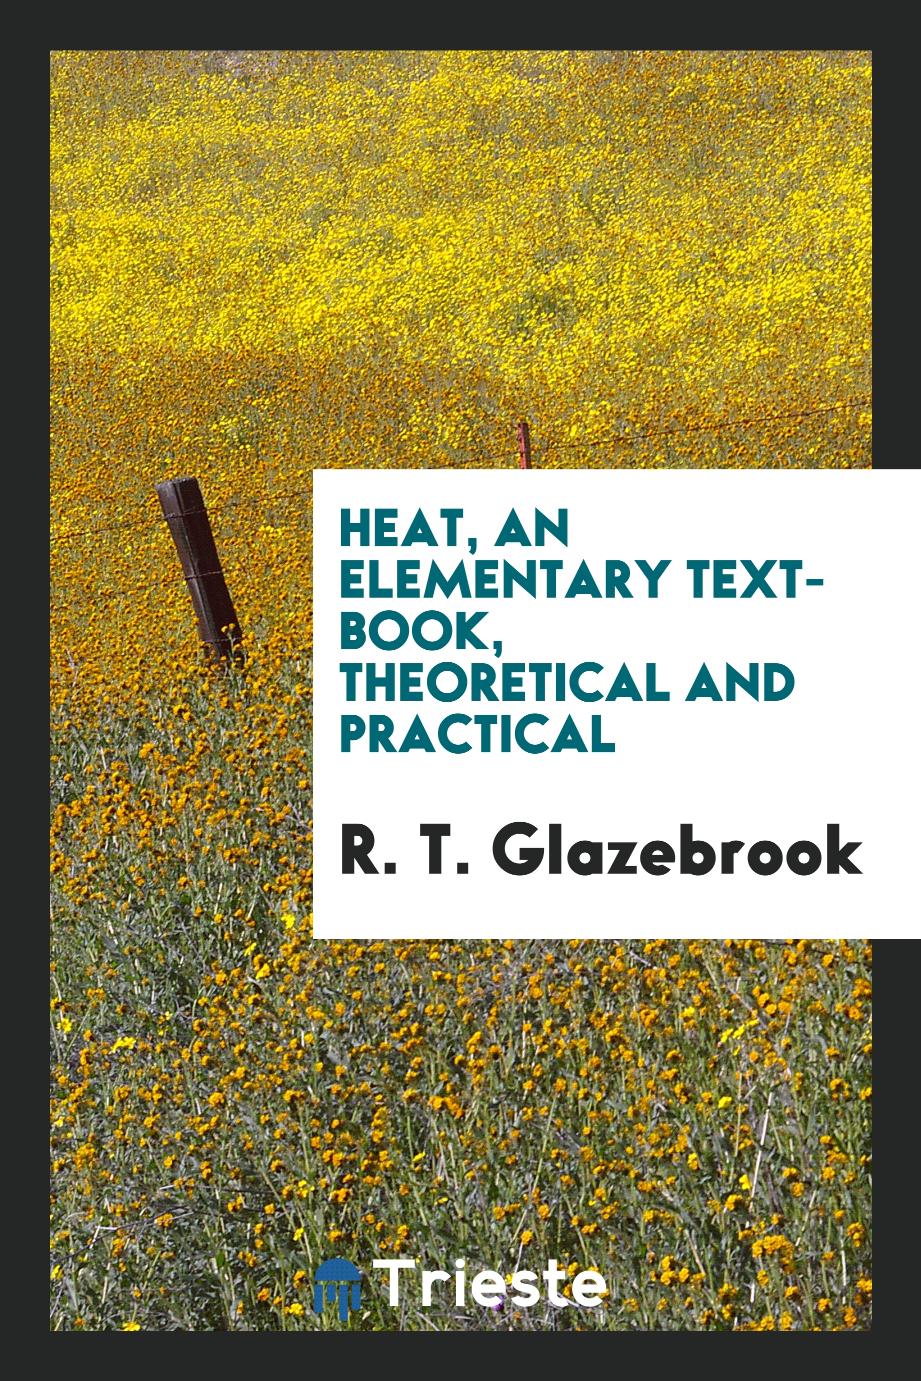 Heat, an elementary text-book, theoretical and practical